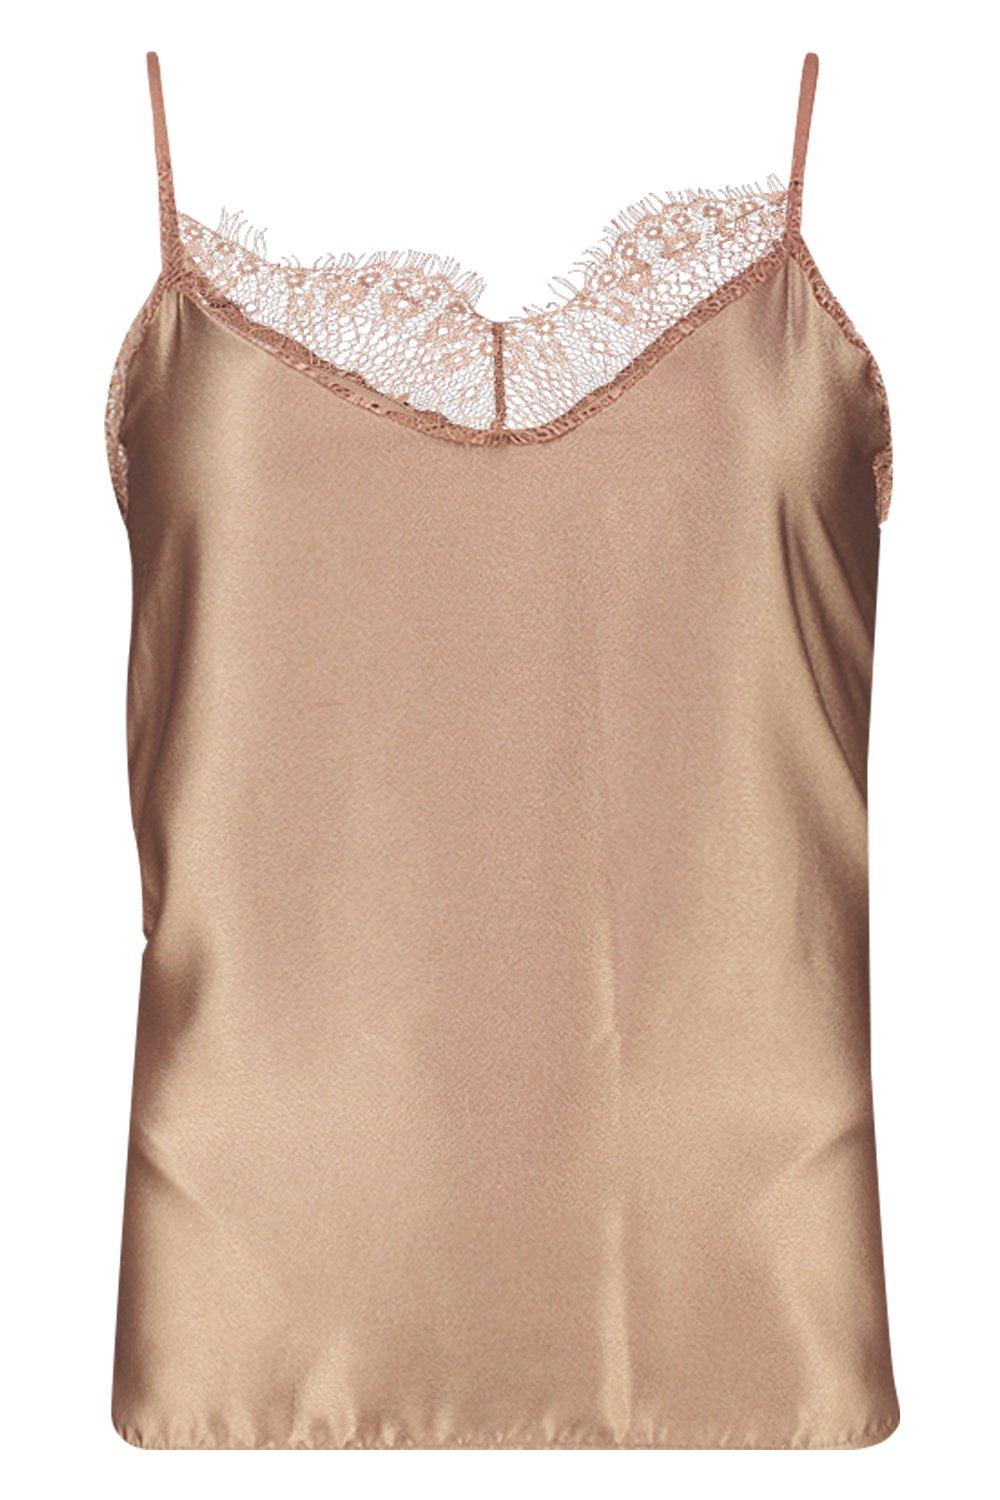 LACE-TRIMMED SILK CAMI TOP - BROWN - COS